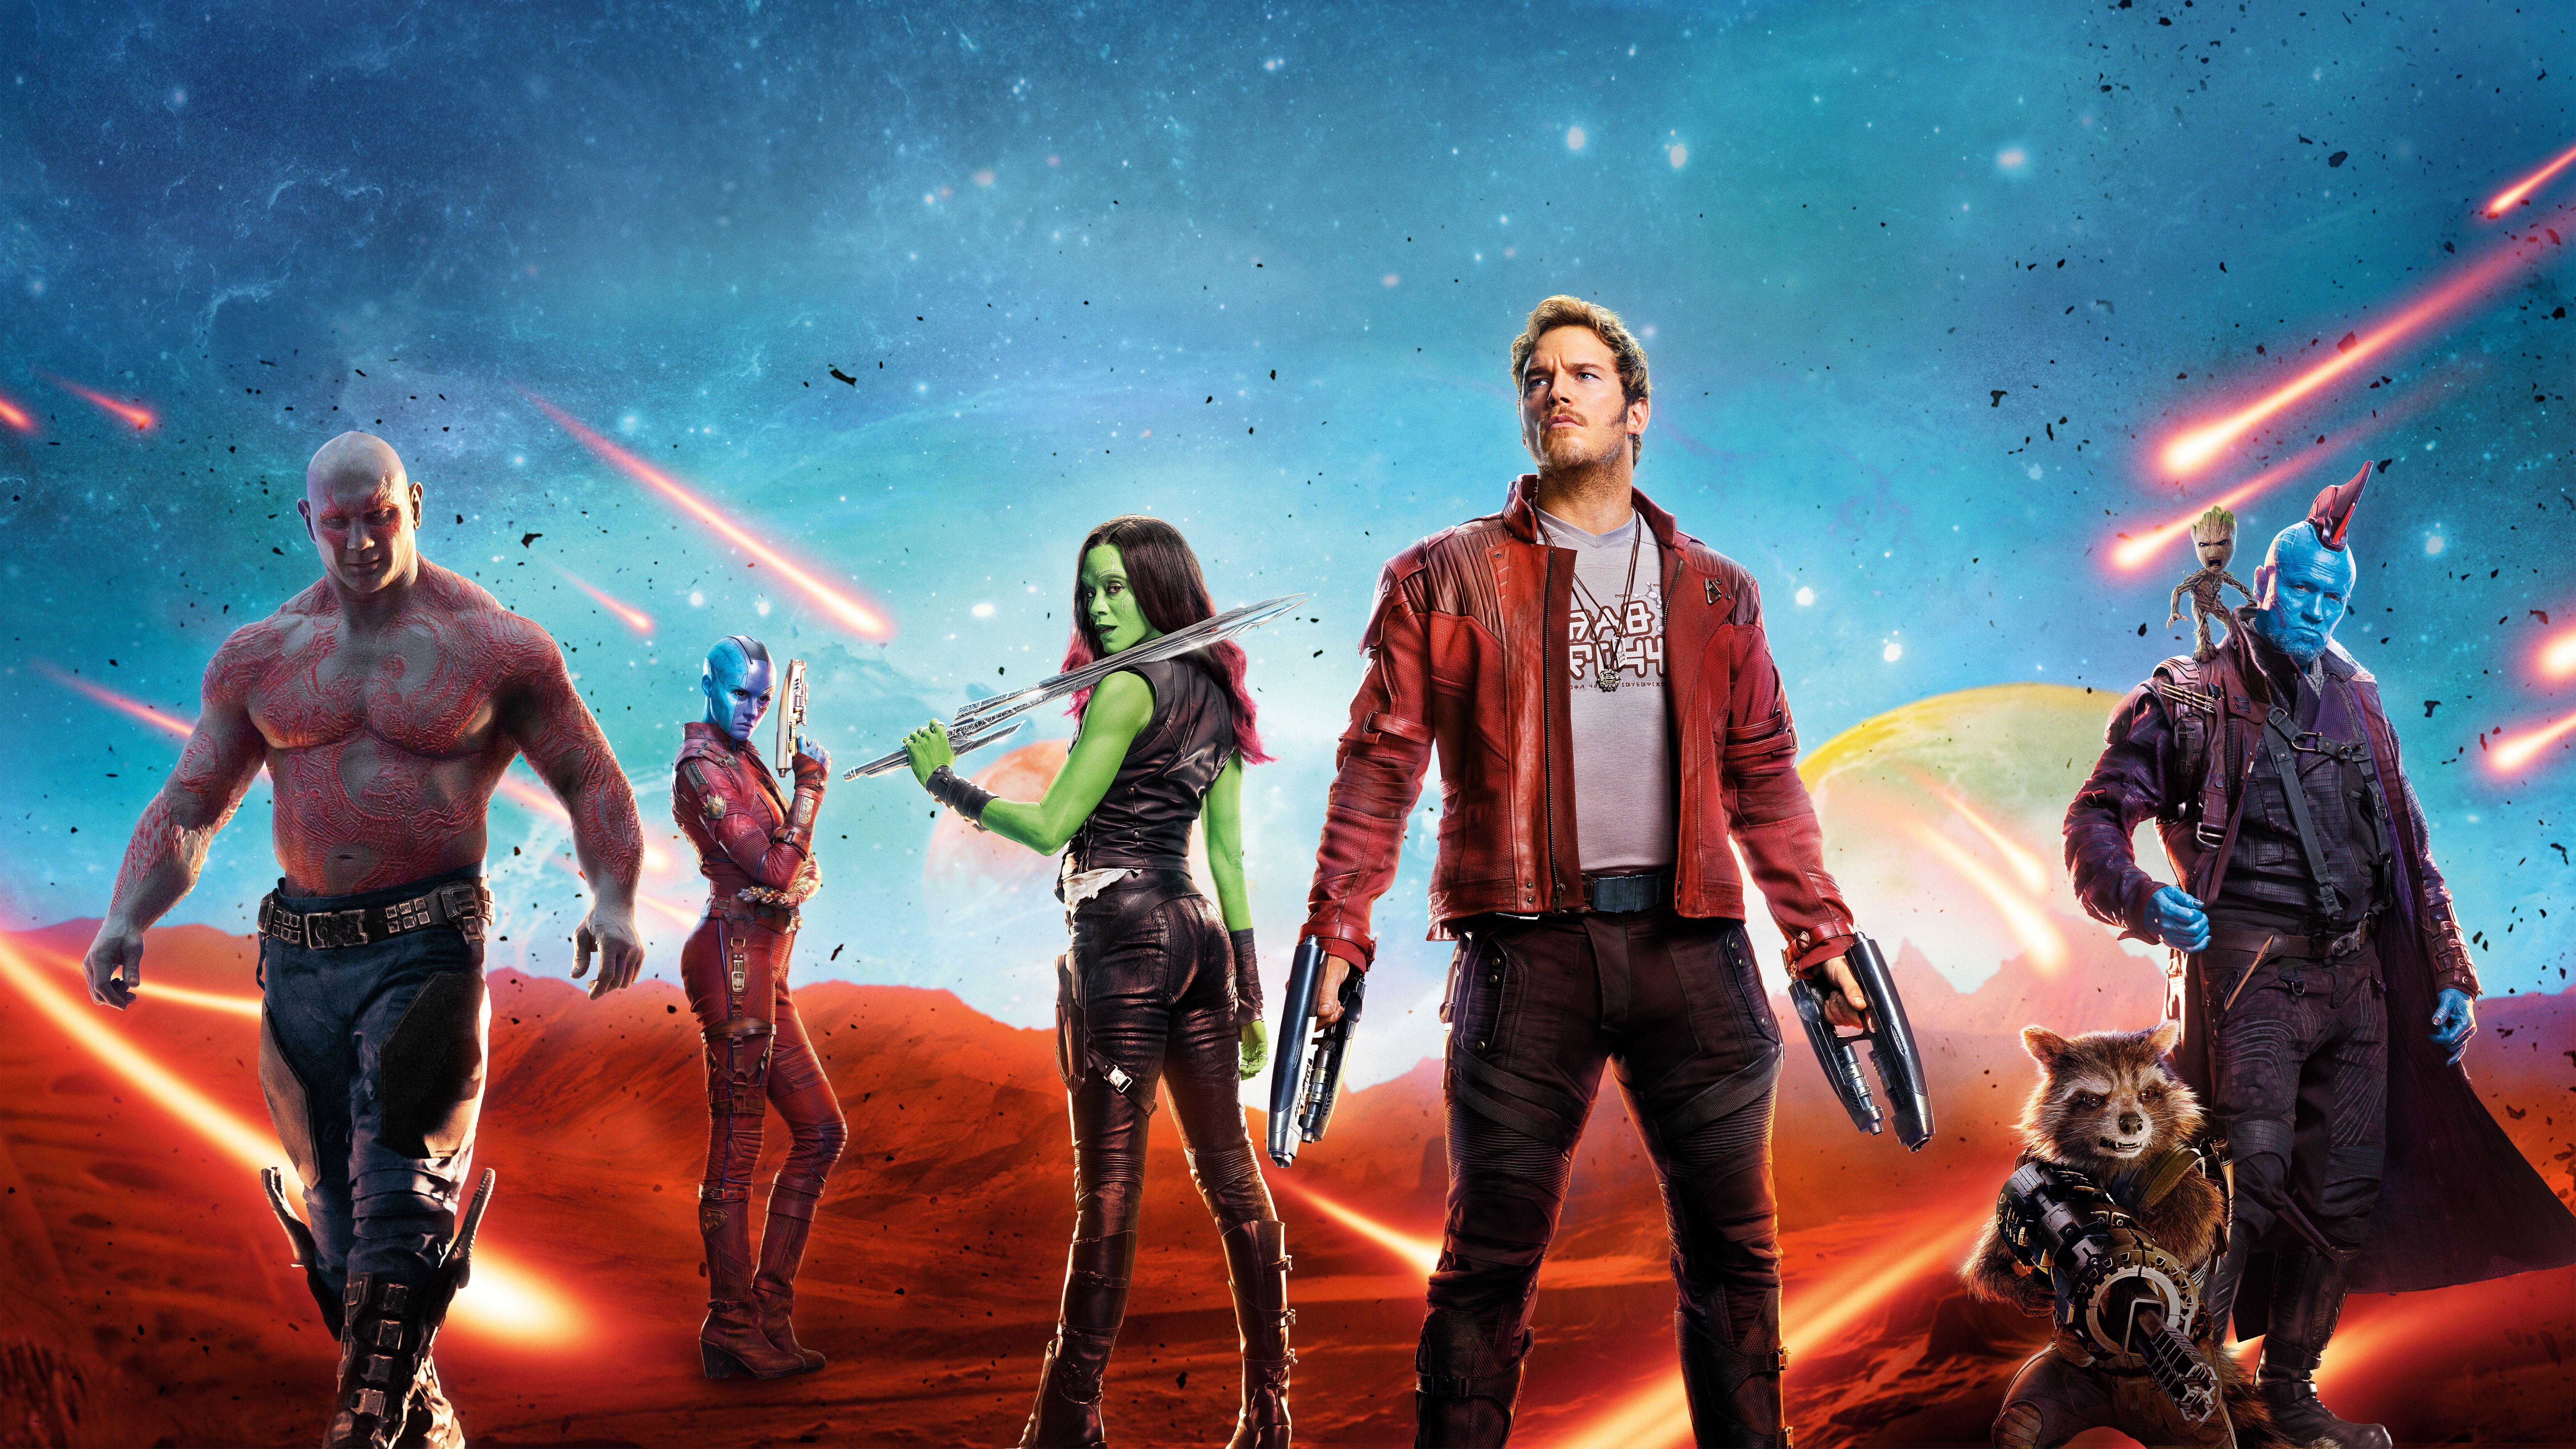 Guardians of the Galaxy 2 Wallpapers - Top Free Guardians ...